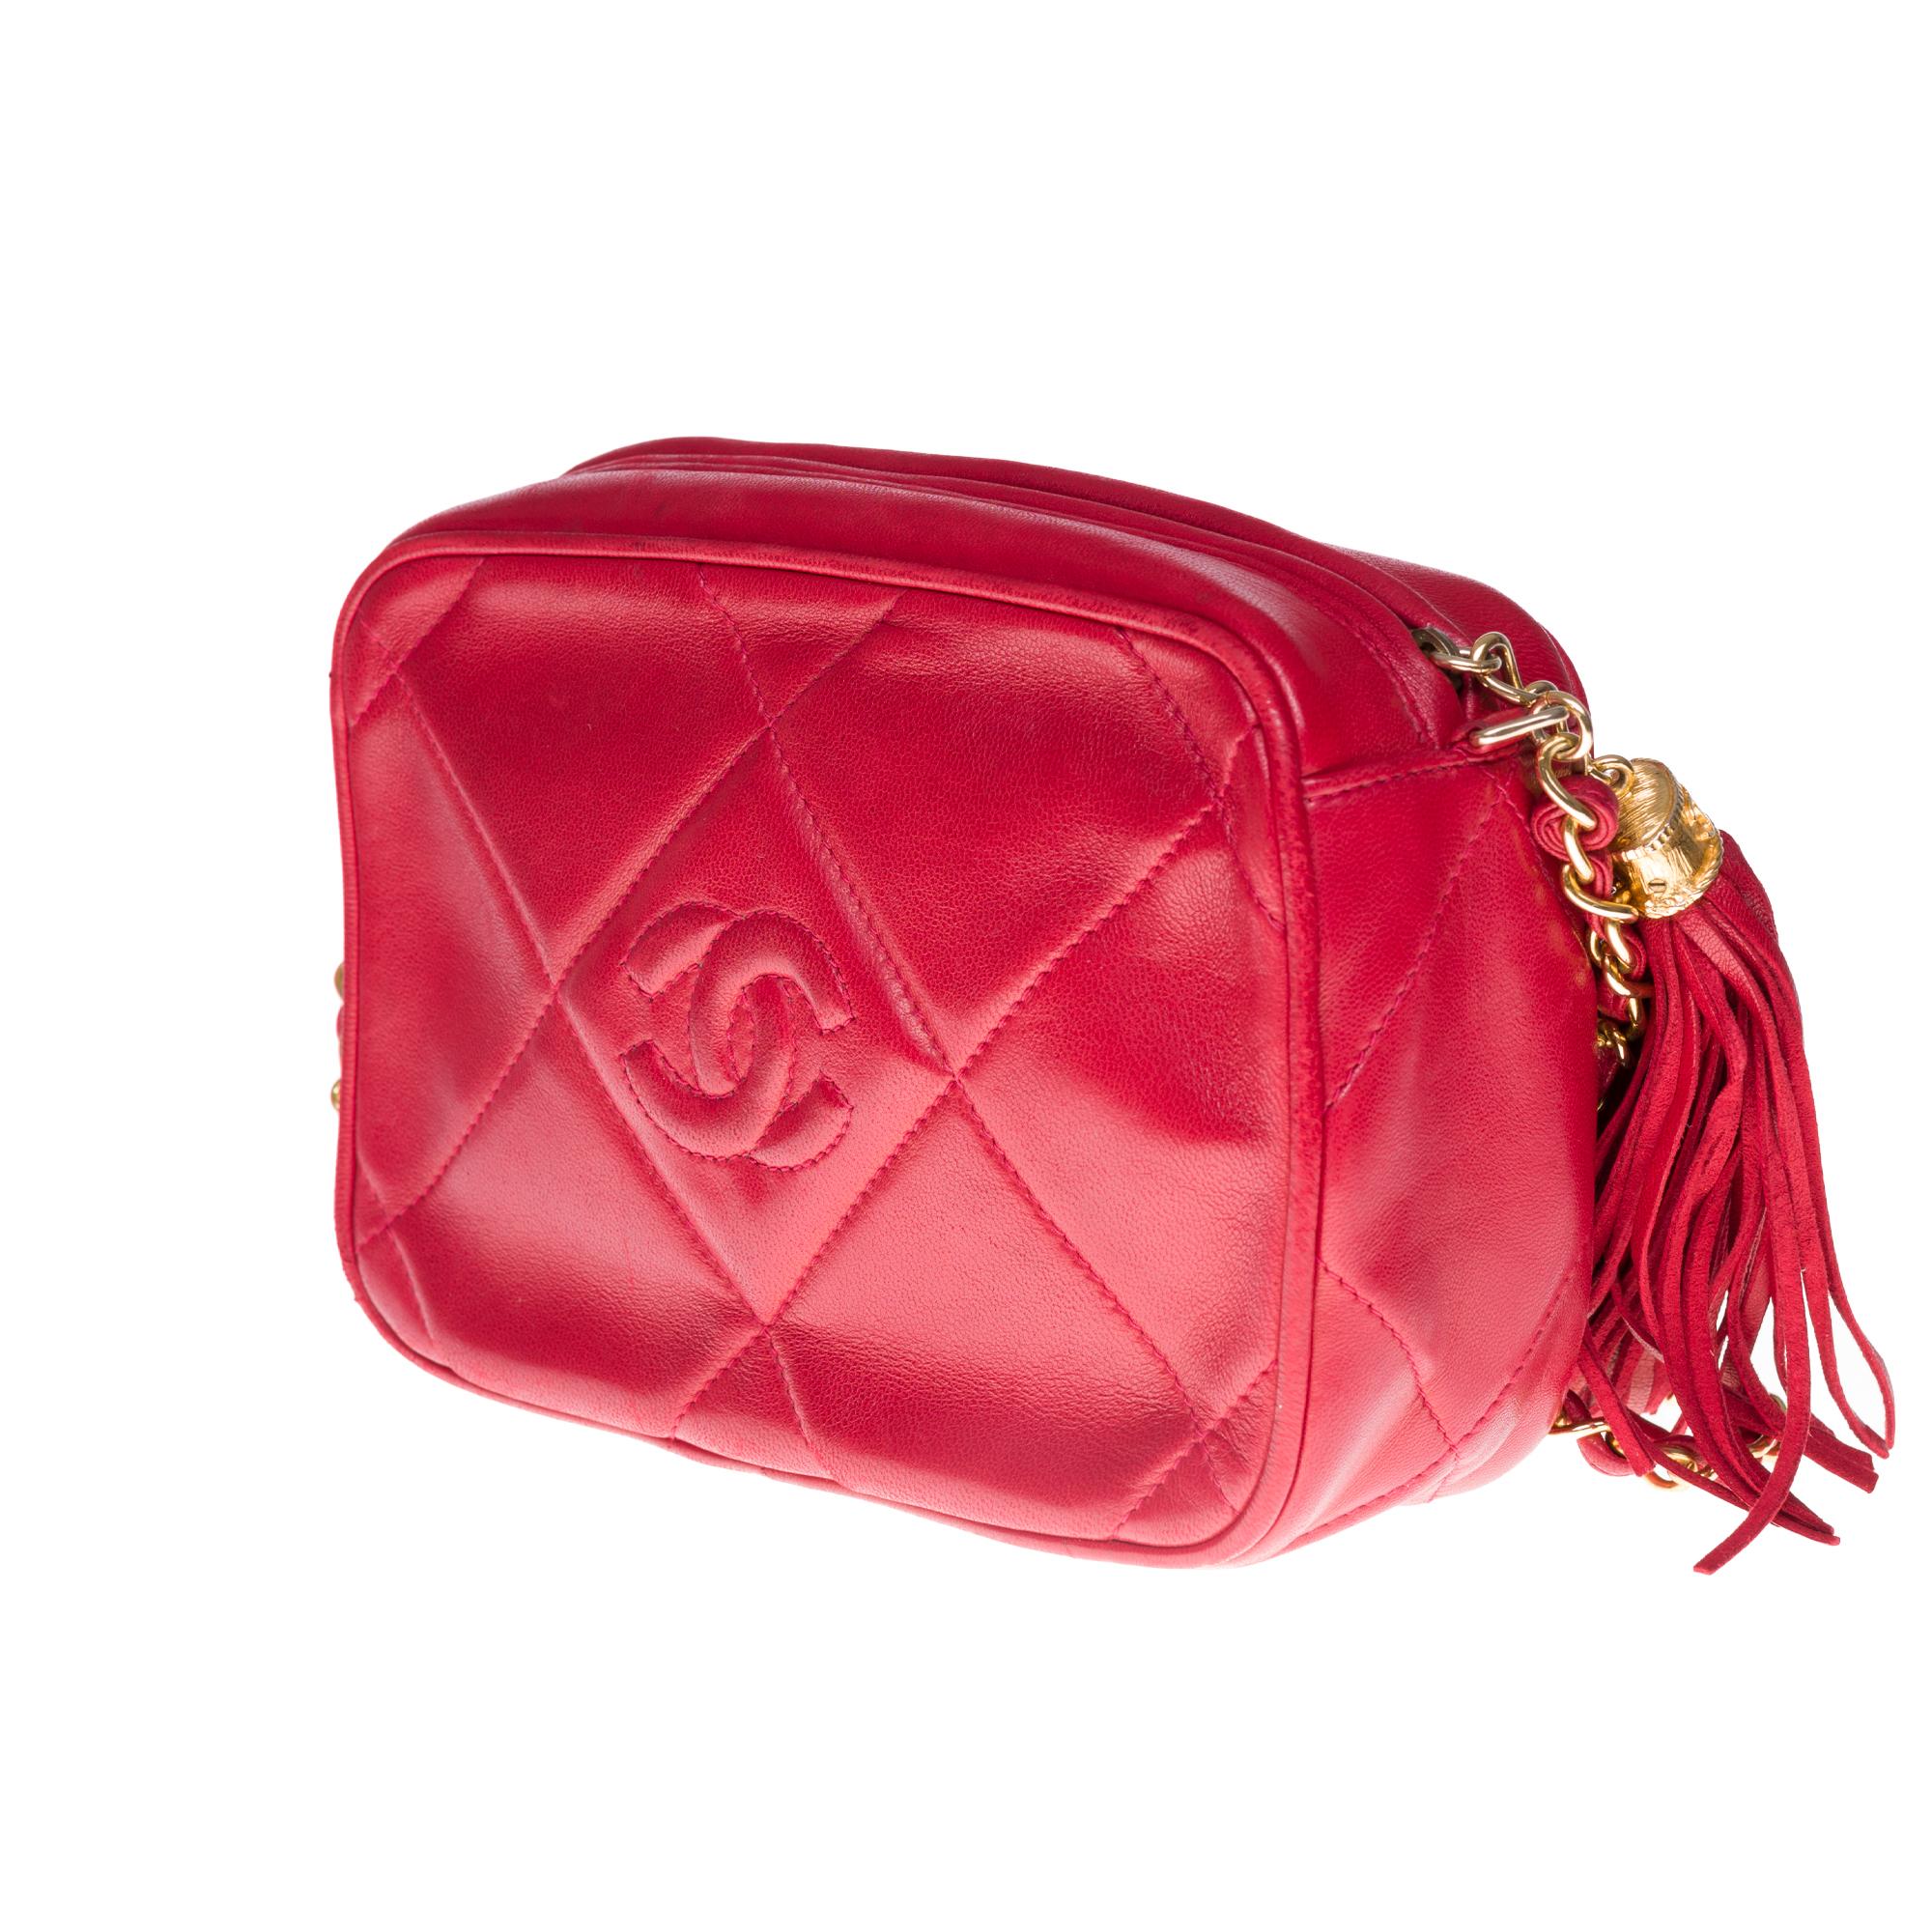 Women's Amazing Chanel Mini Camera shoulder bag in Red quilted leather, gold hardware